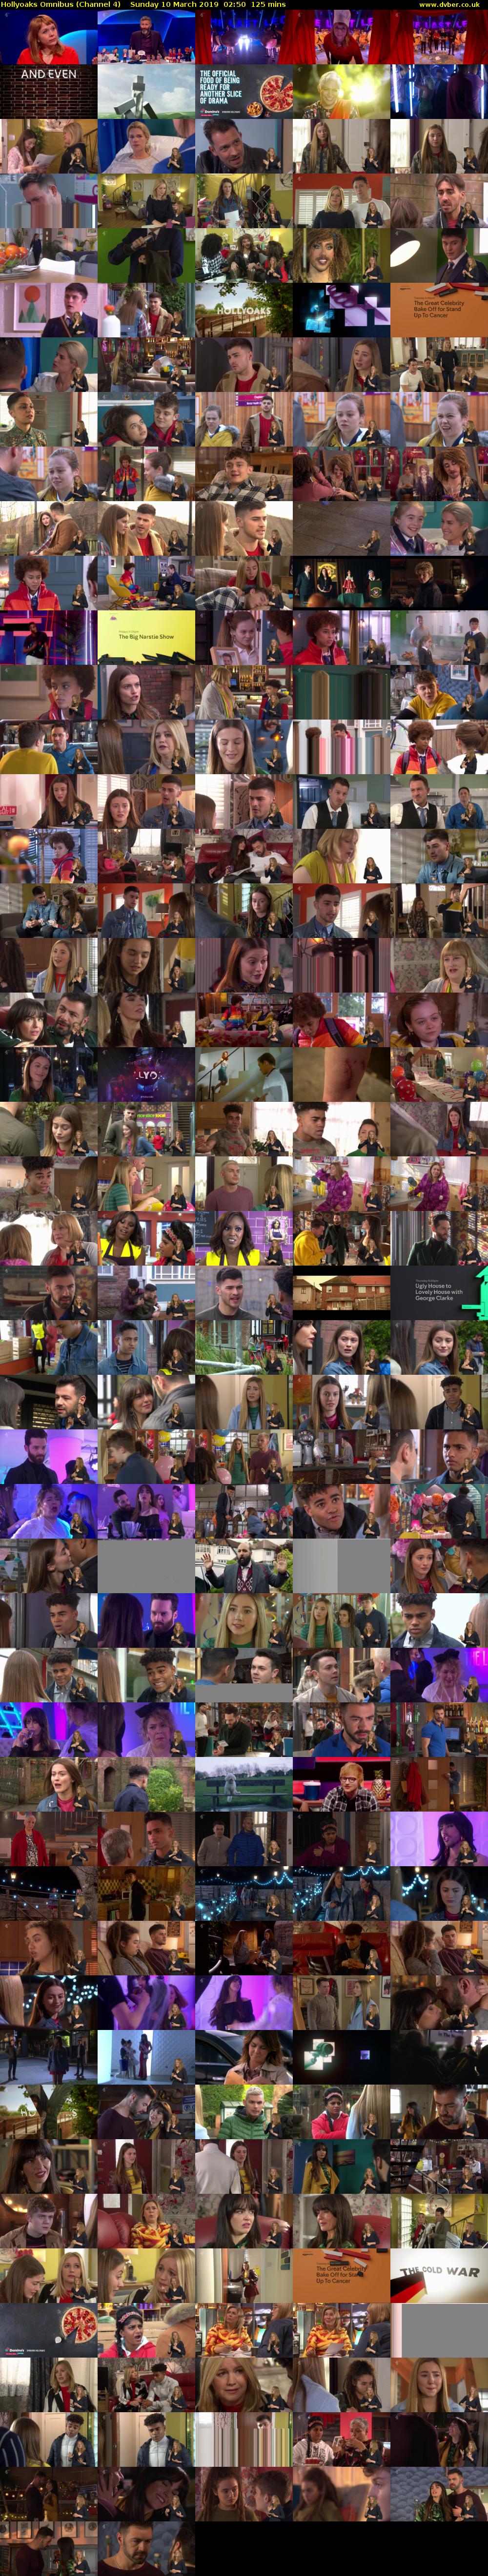 Hollyoaks Omnibus (Channel 4) Sunday 10 March 2019 02:50 - 04:55